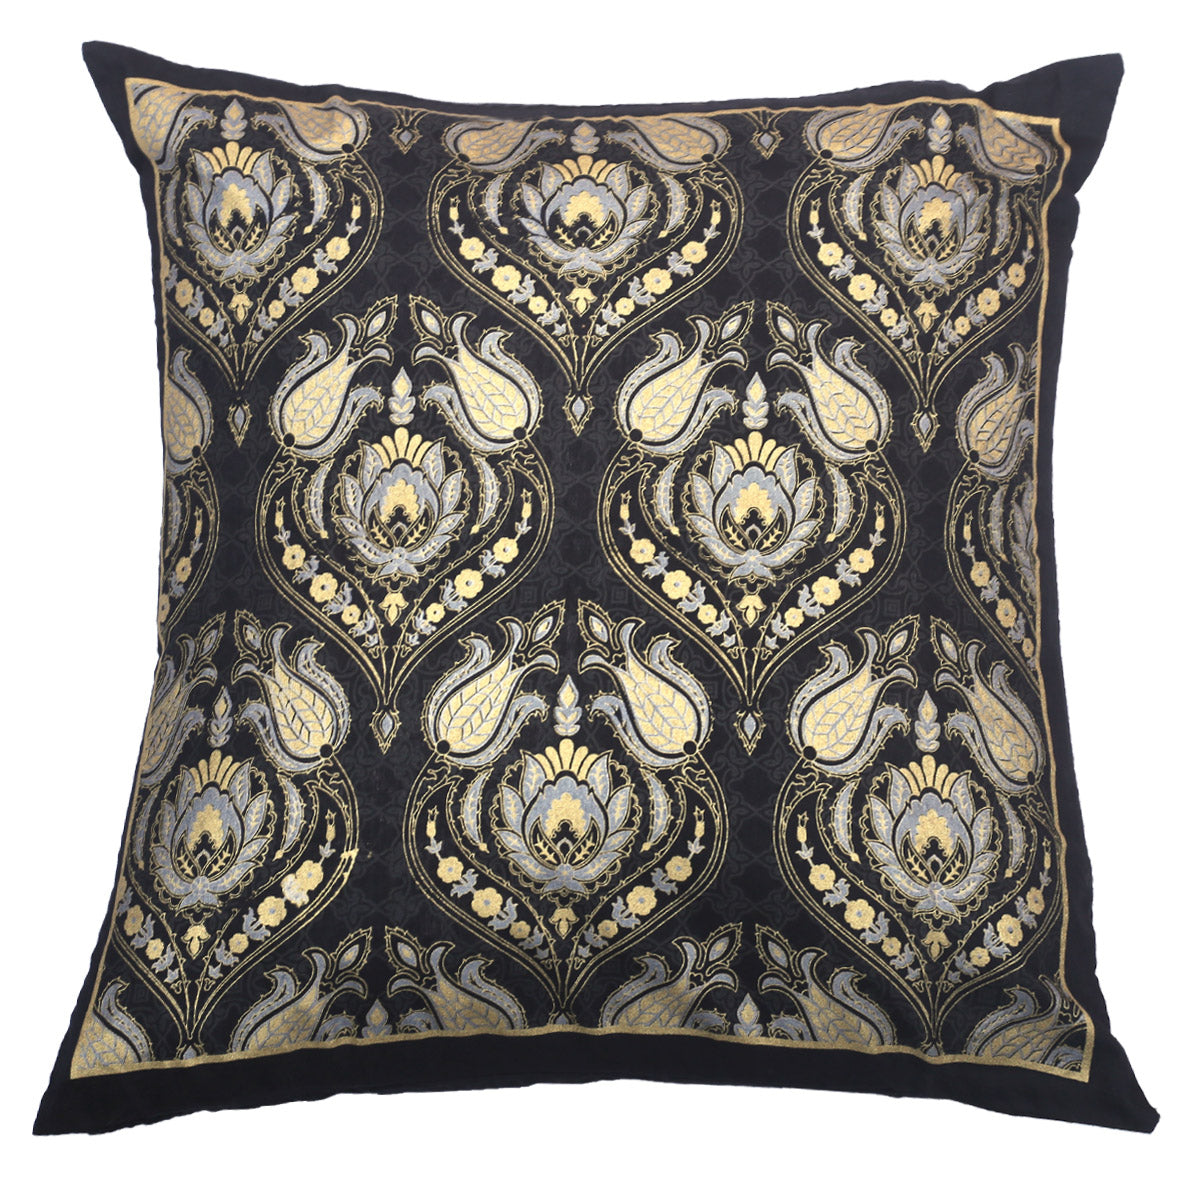 Gold Floral Cushion Cover 18x18"